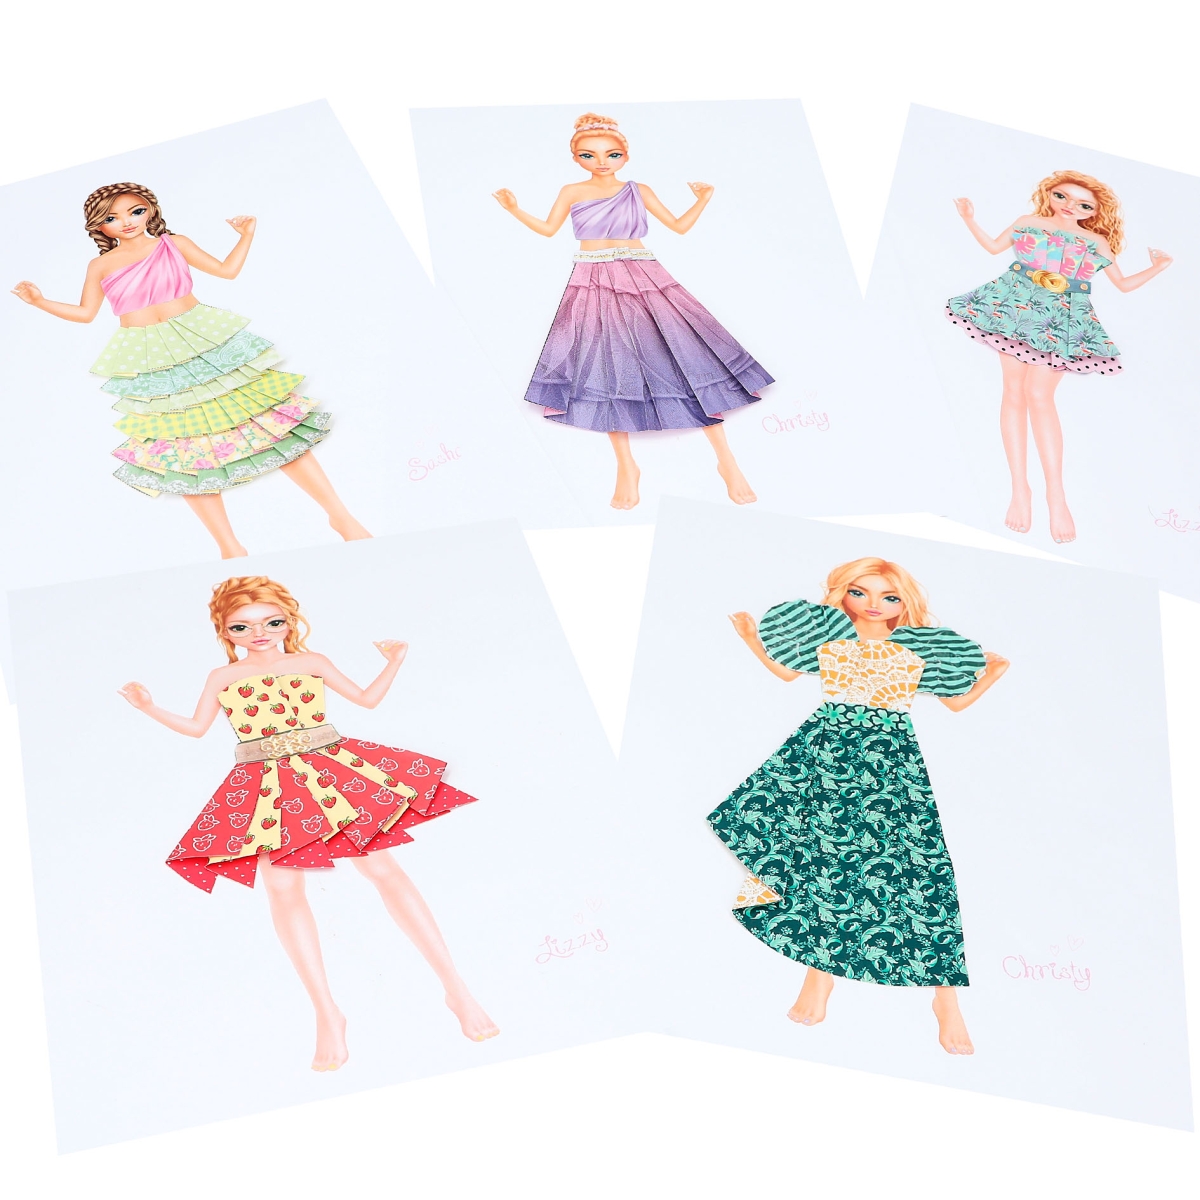 DEPESCHE 12379 TOPMODEL Dress Me Up Collage Colouring 20 Pages for  Designing Out EUR 21,87 - PicClick FR